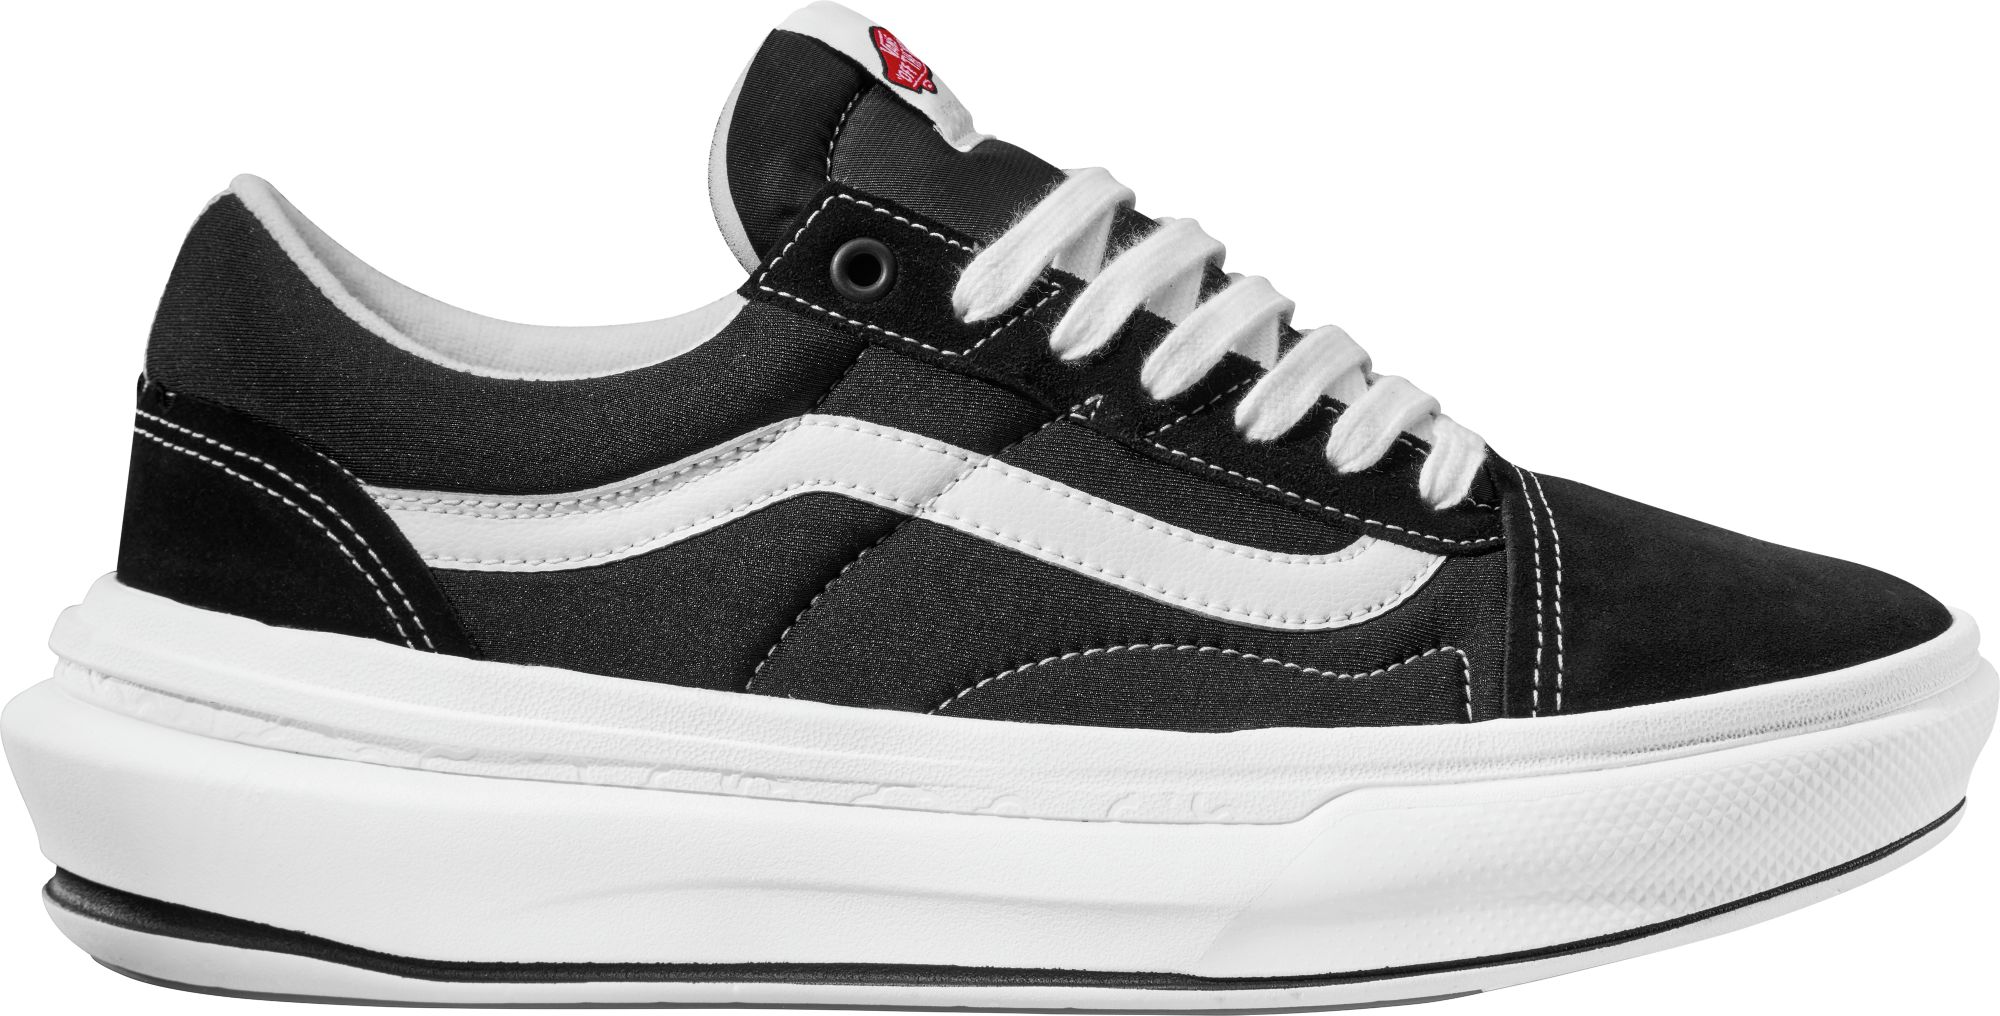 Vans Men's Old Skool Overt Plus CC Shoes (Various) from $36 + Free Store Pickup at Dick's Sporting Goods or on $49+